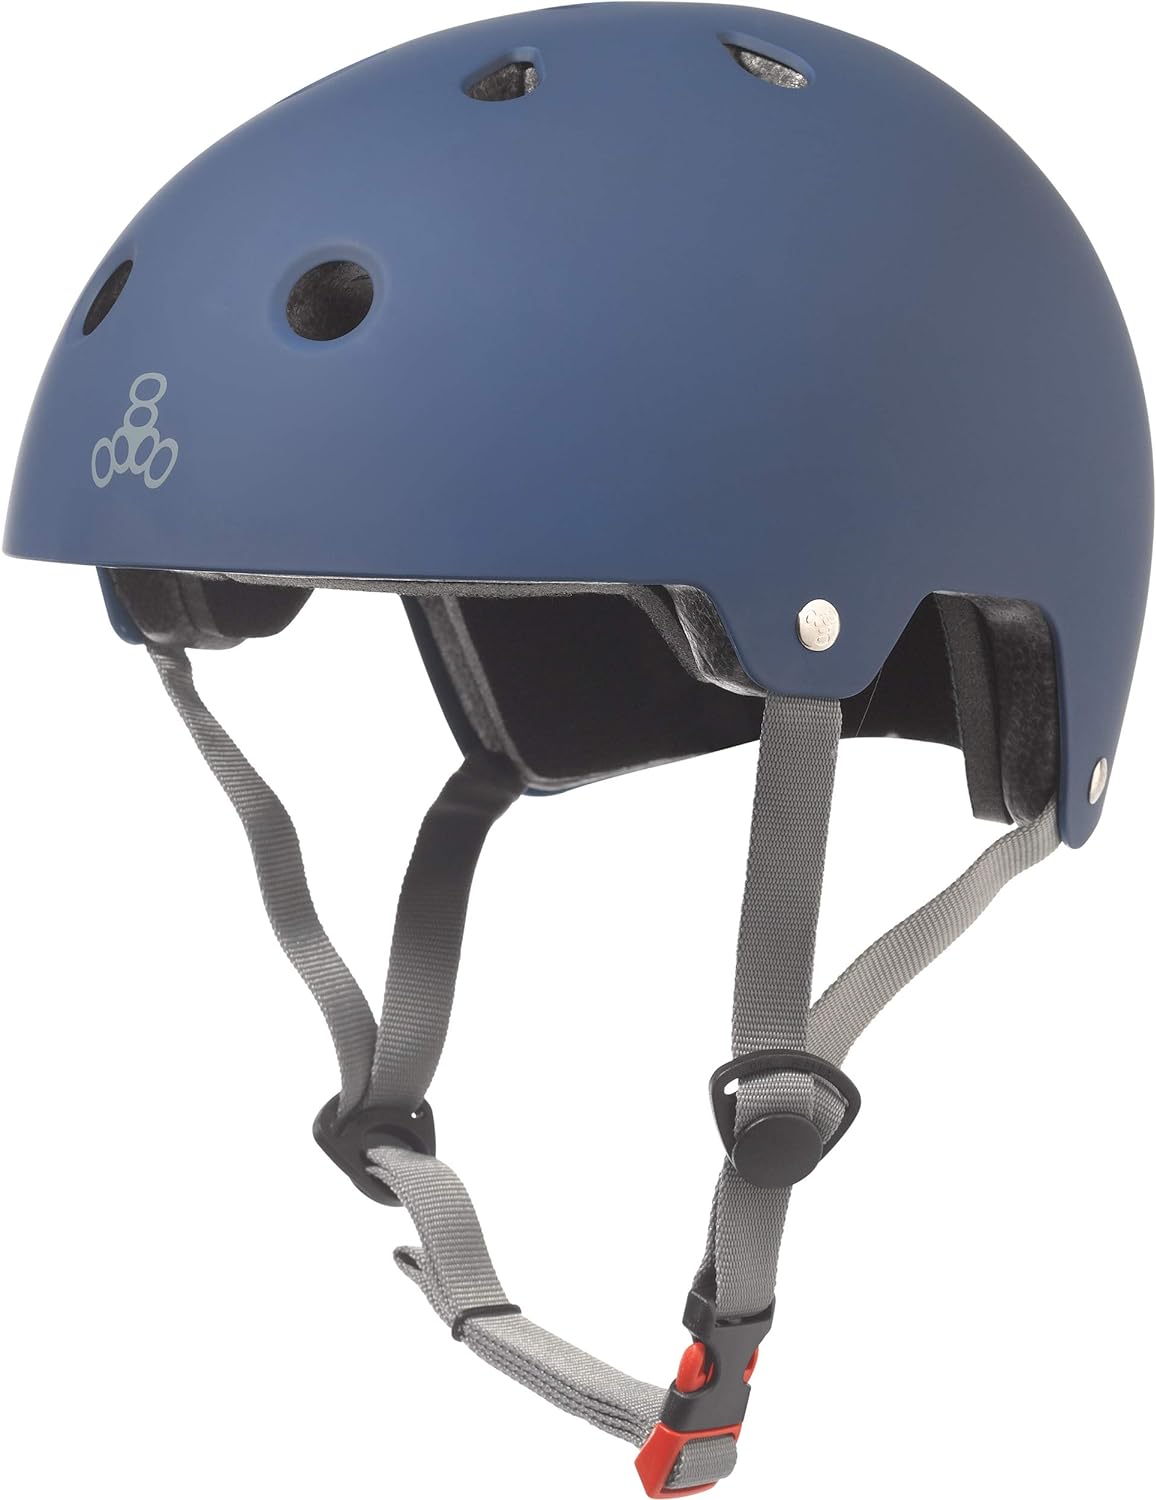 Buy Triple Eight Dual Certified Helmet for Bike, Skateboard, Scooter,  Roller Skating, Sizes for Adults and Teens Online in Pakistan. B0091PBR48